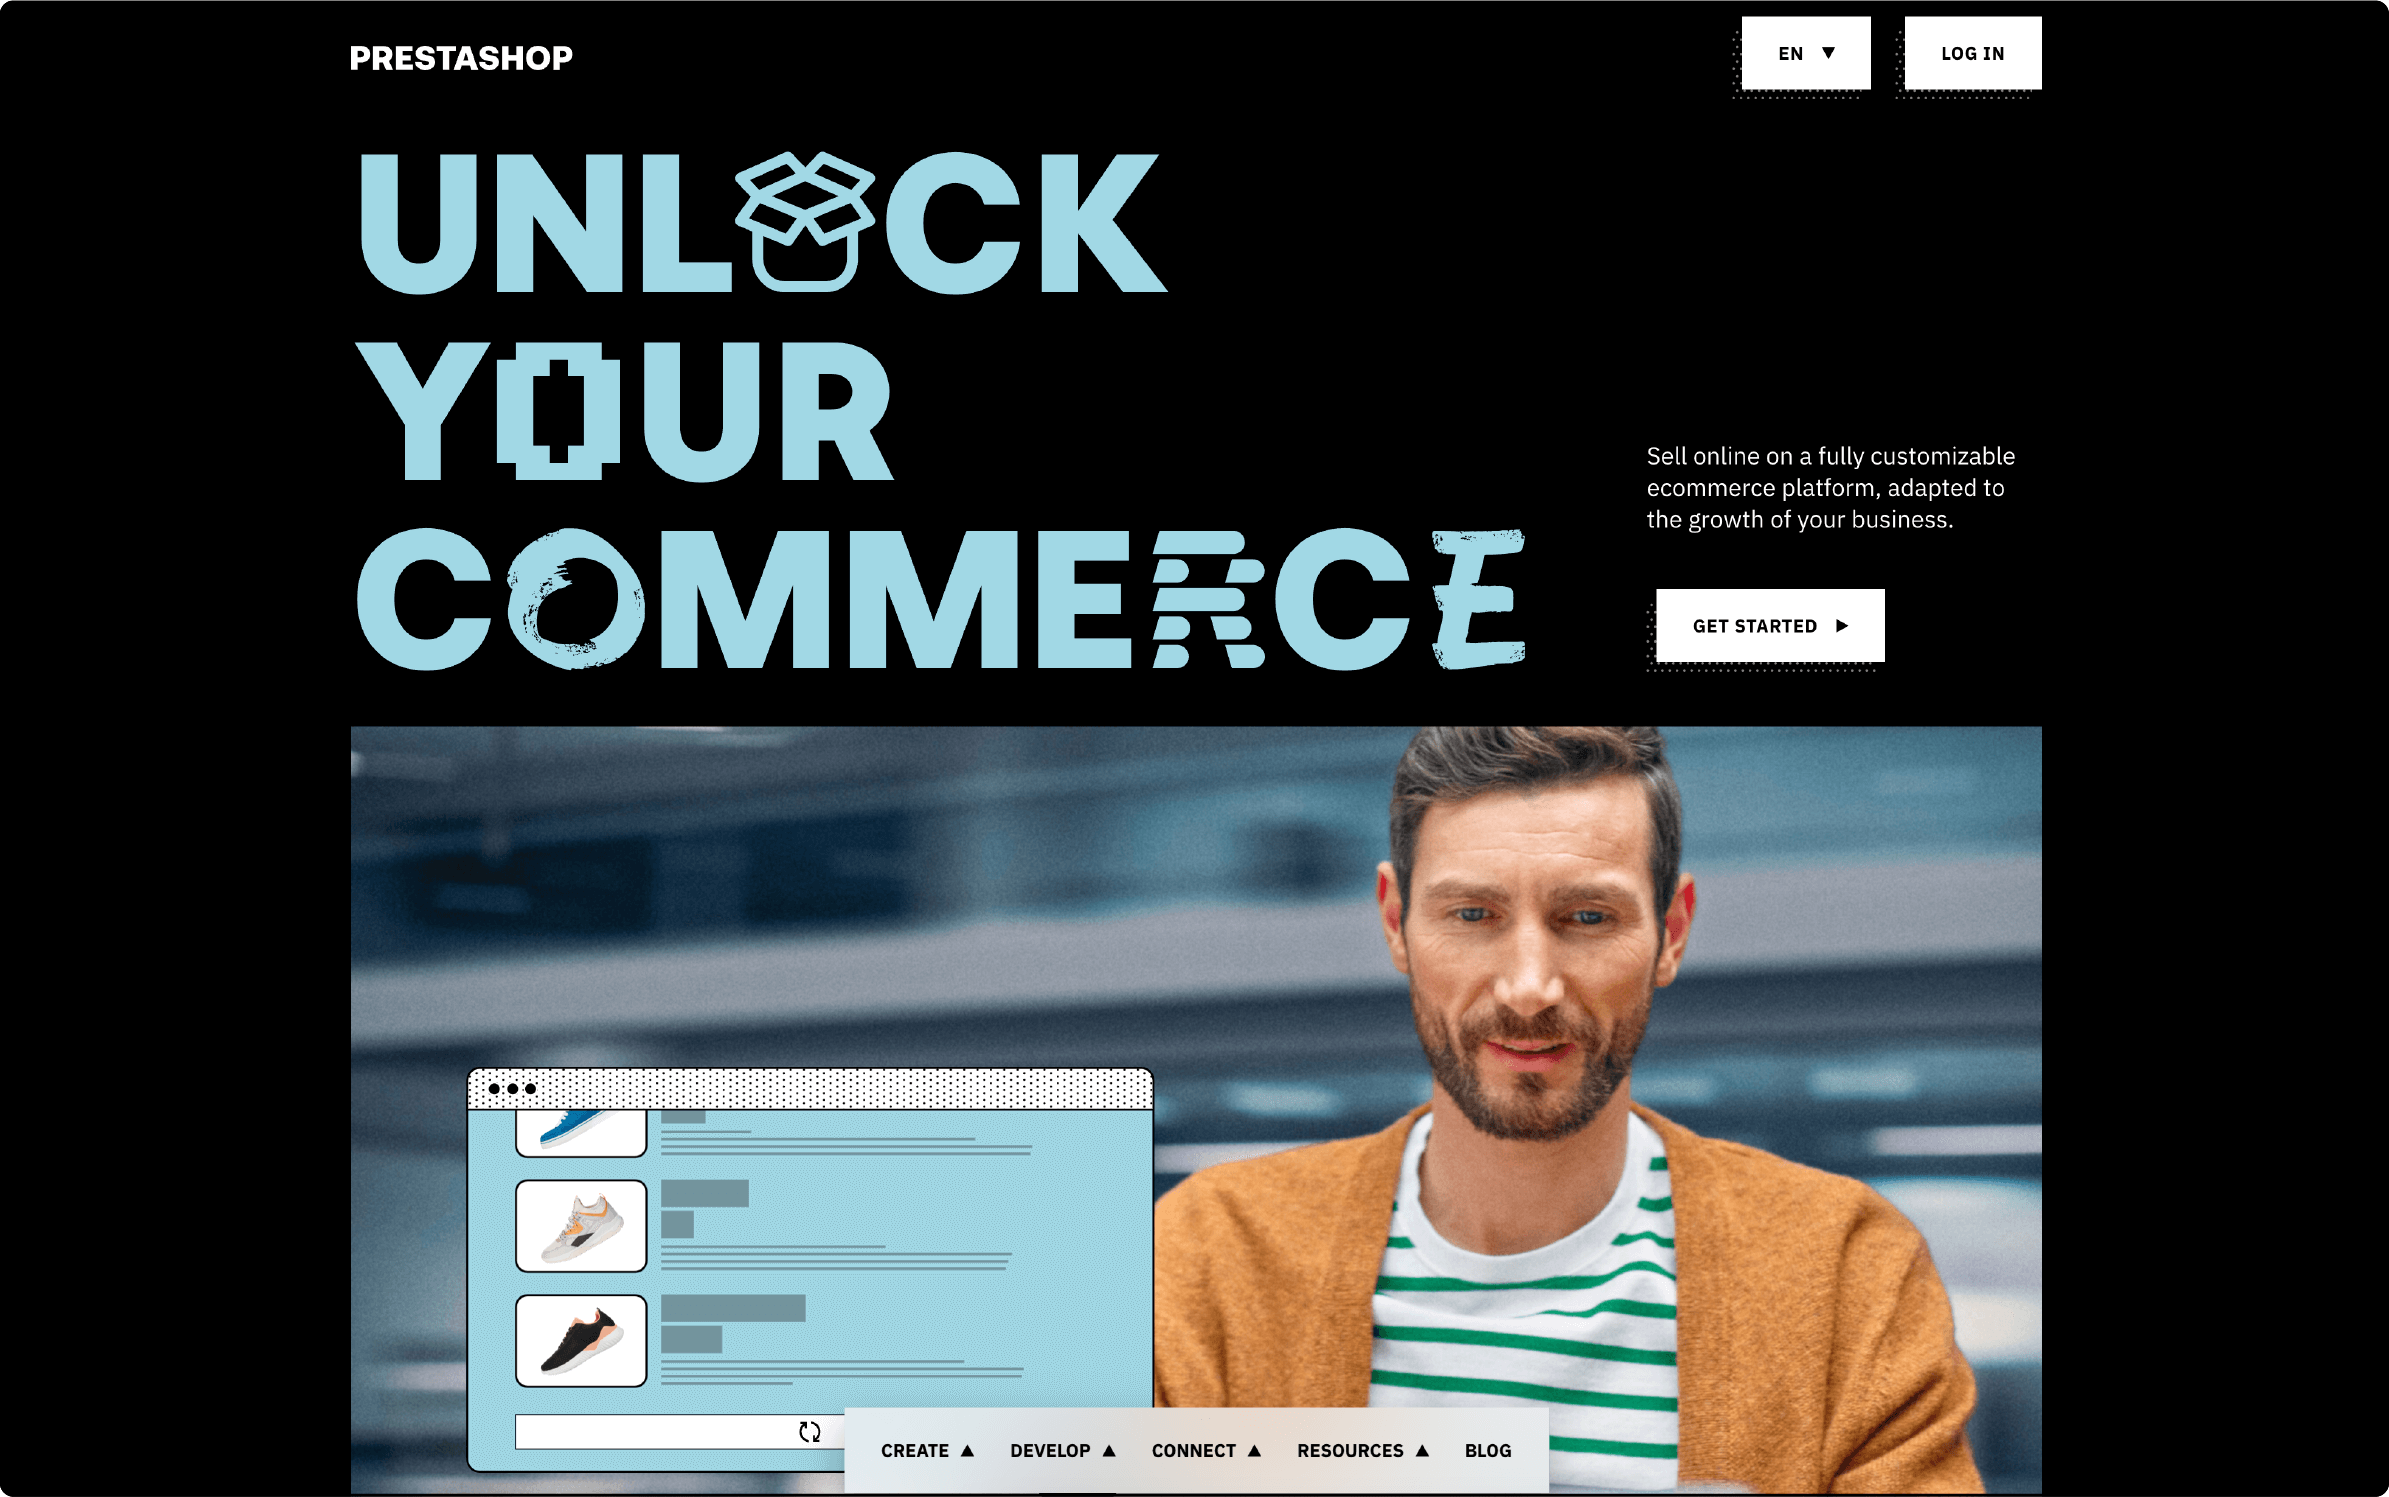 Overview of PrestaShop's features and capabilities for ecommerce